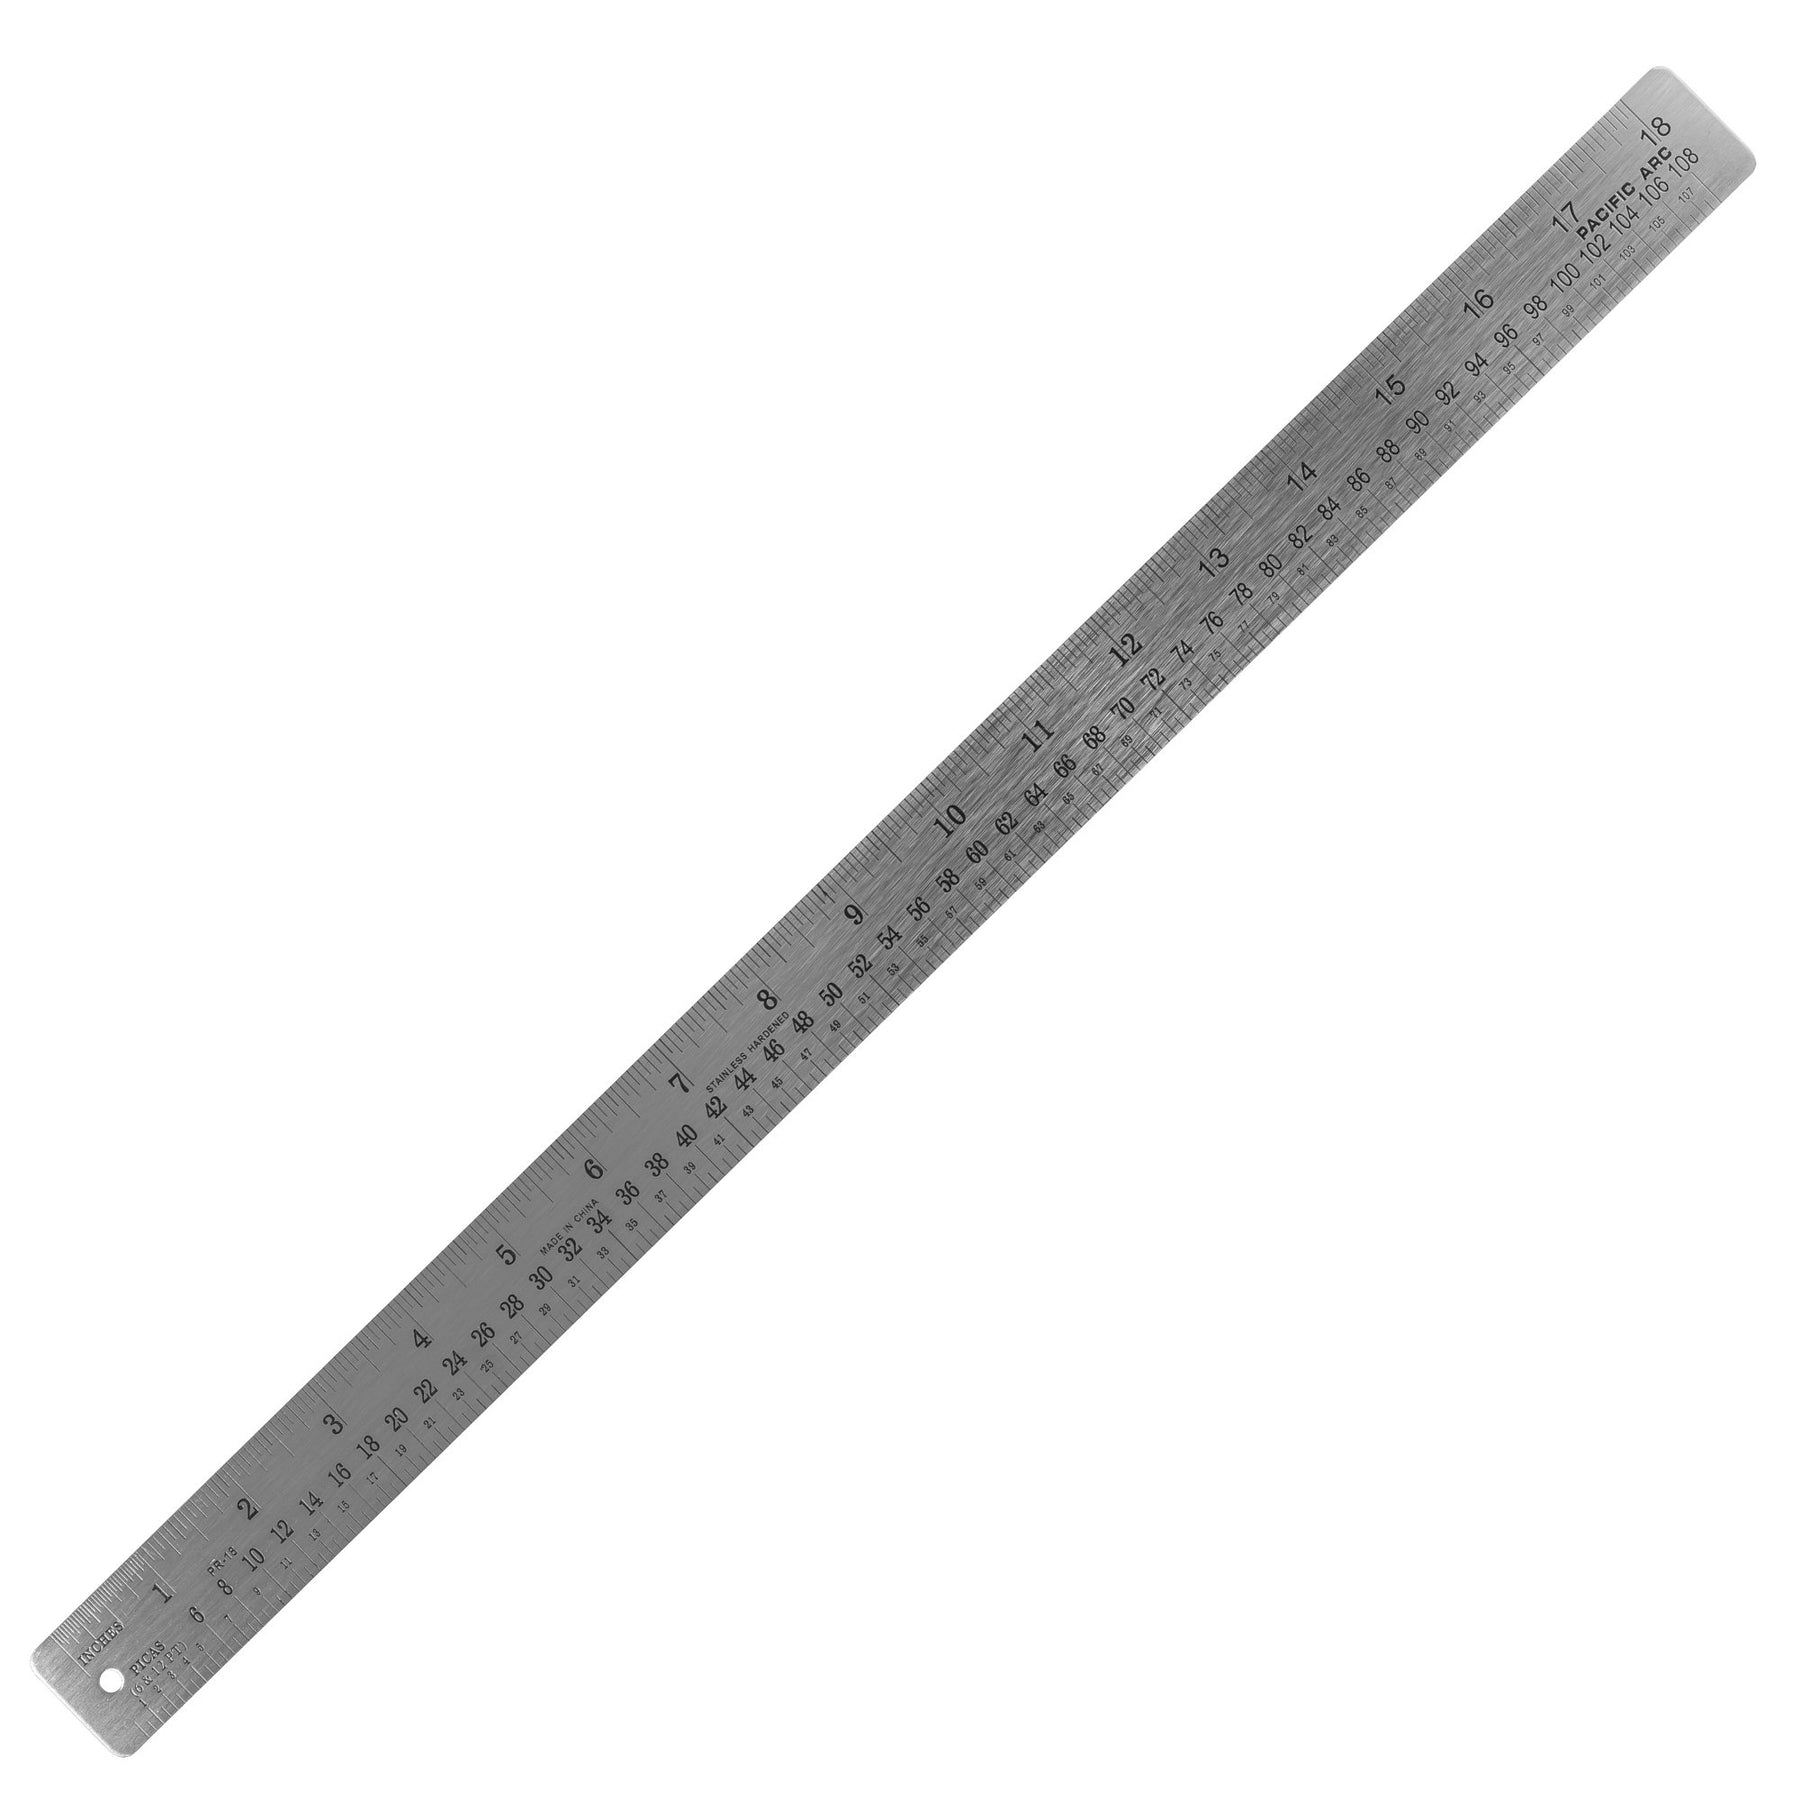 Pacific Arc 12 inch Pica Pole Metal Ruler, with Pica, Points, Inches, and  Agate Measurements, Stainless Steel Ruler for Drafting